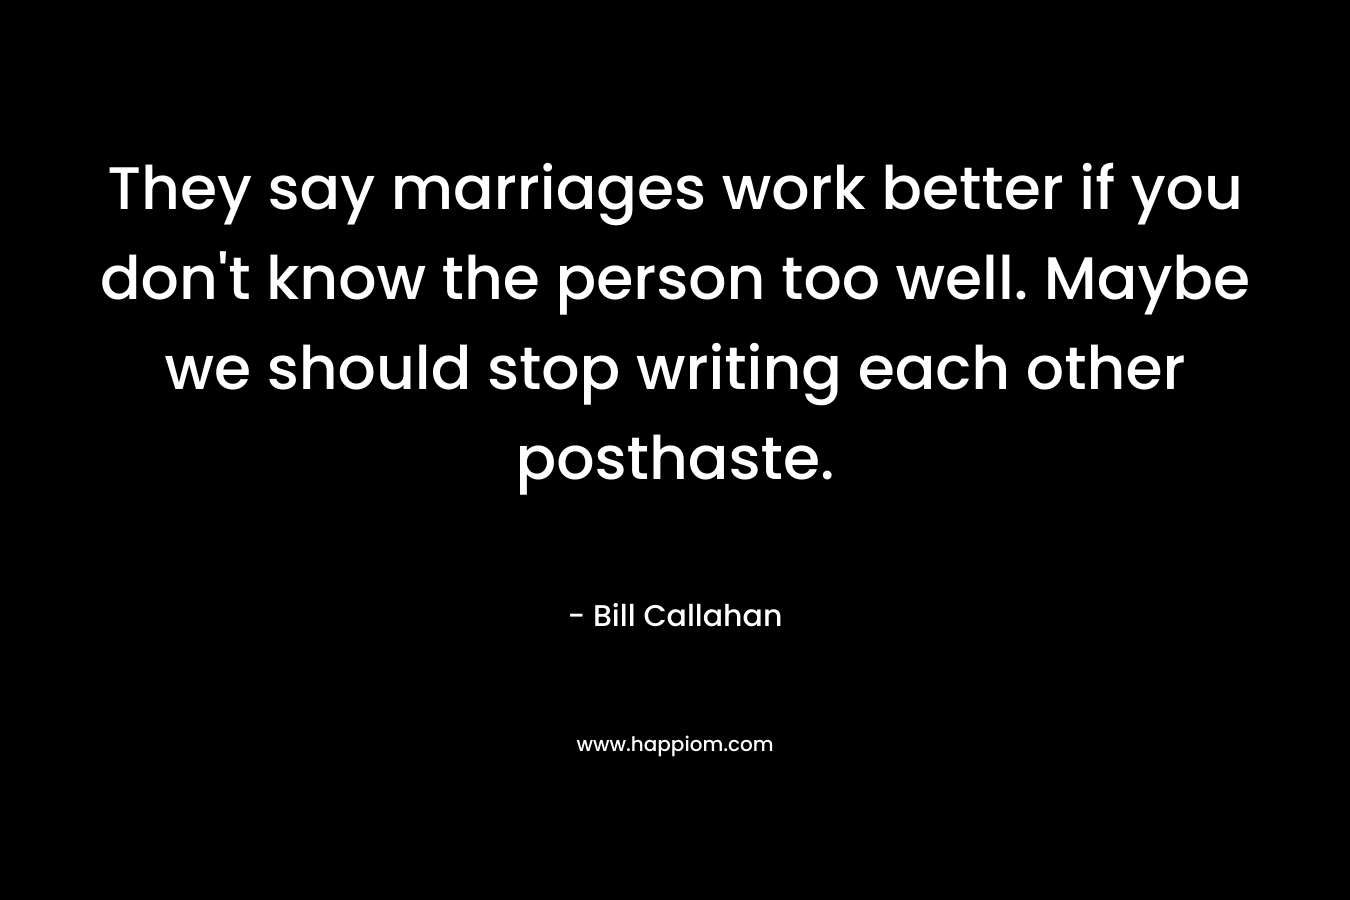 They say marriages work better if you don’t know the person too well. Maybe we should stop writing each other posthaste. – Bill Callahan